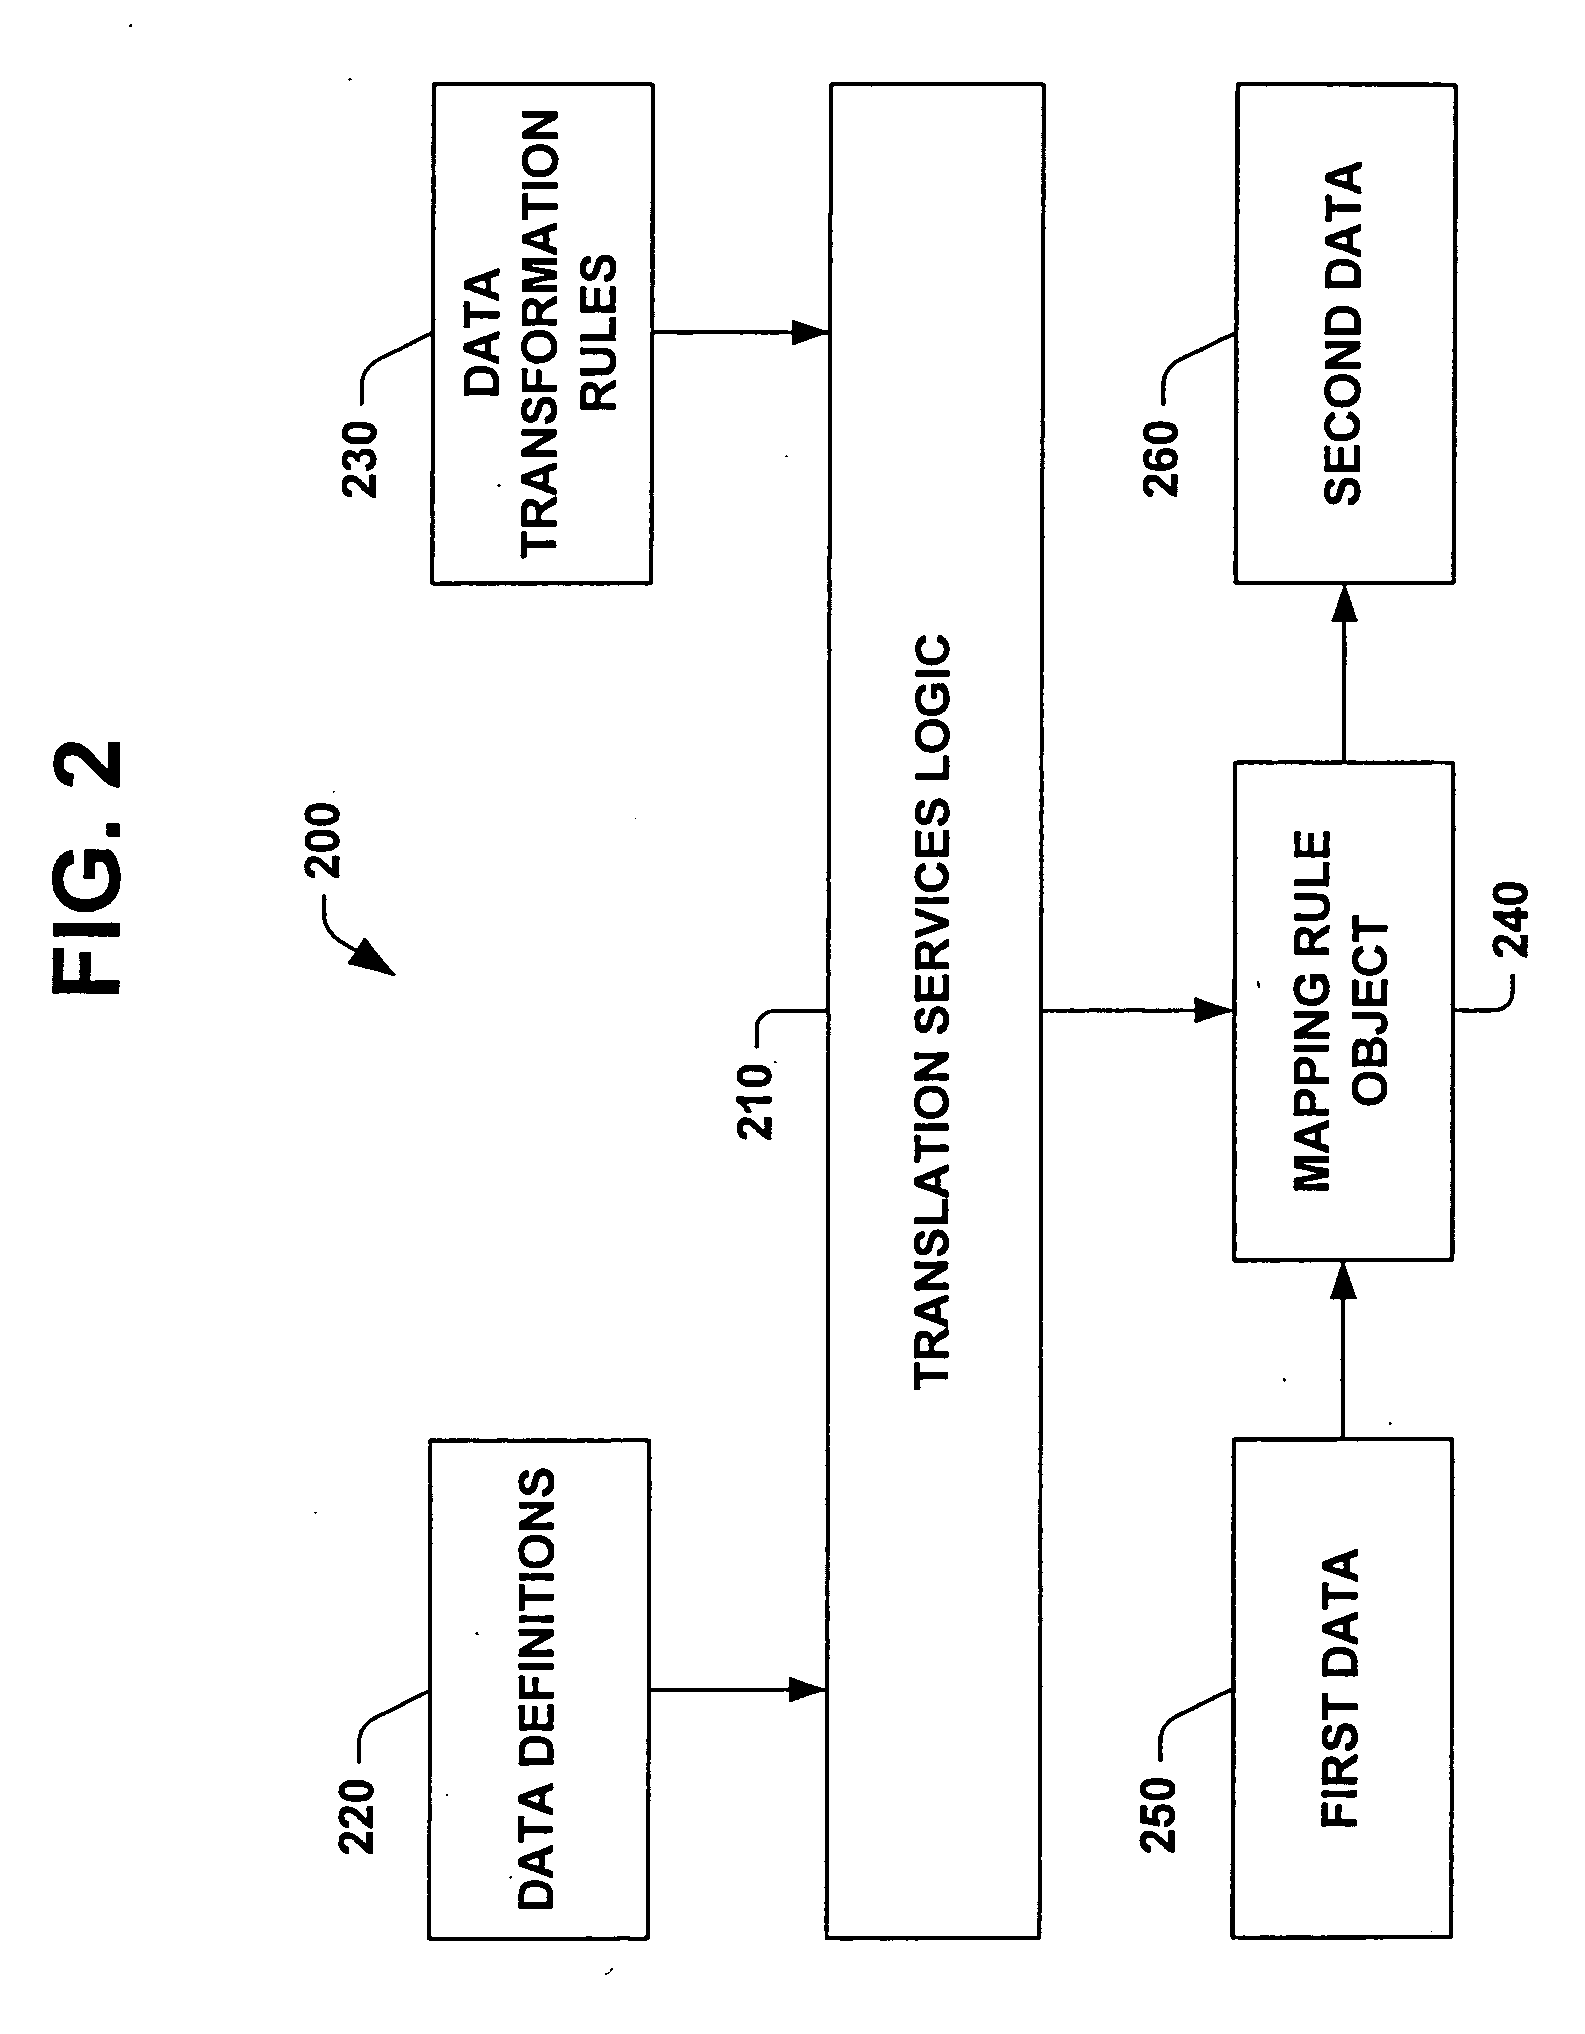 System and method for transforming business process policy data